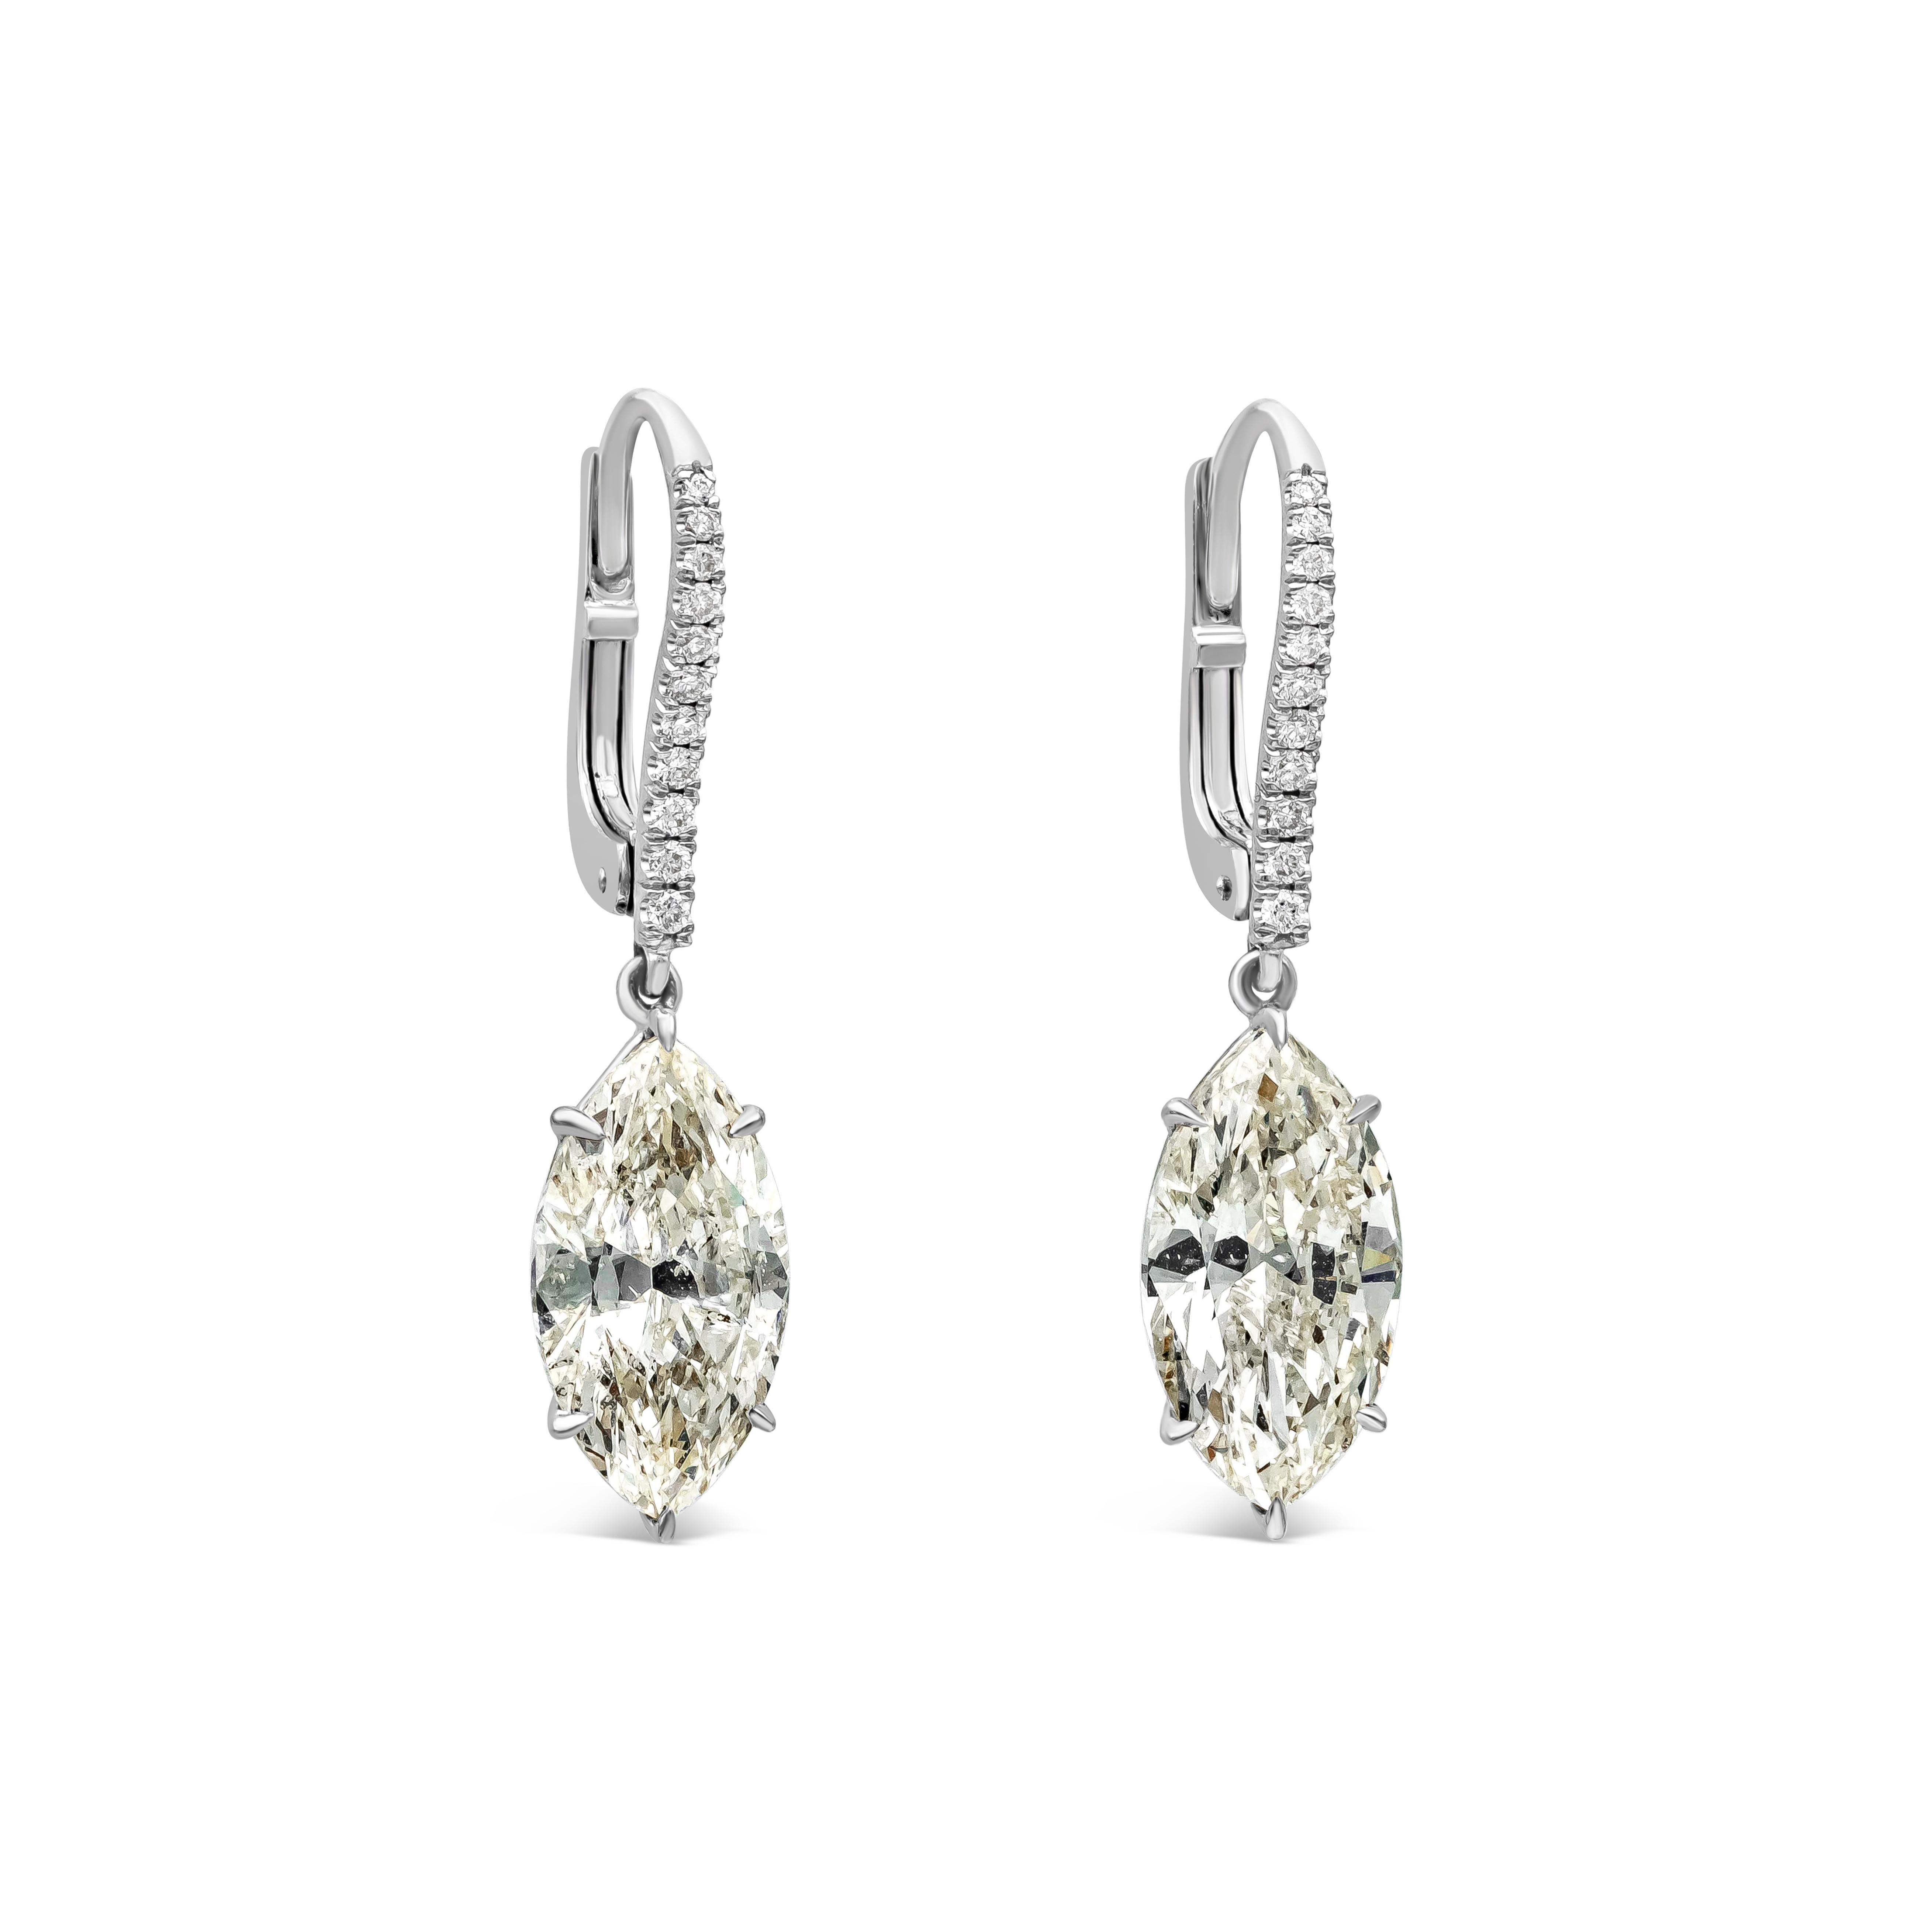 This beautiful pair of dangle earrings showcases two marquise cut diamonds weighing 6.69 carats total, L color, SI3-SI1 in clarity. Both hanging by a brilliant round diamond encrusted lever. 22 brilliant round diamonds weigh 0.23 carats total. Made